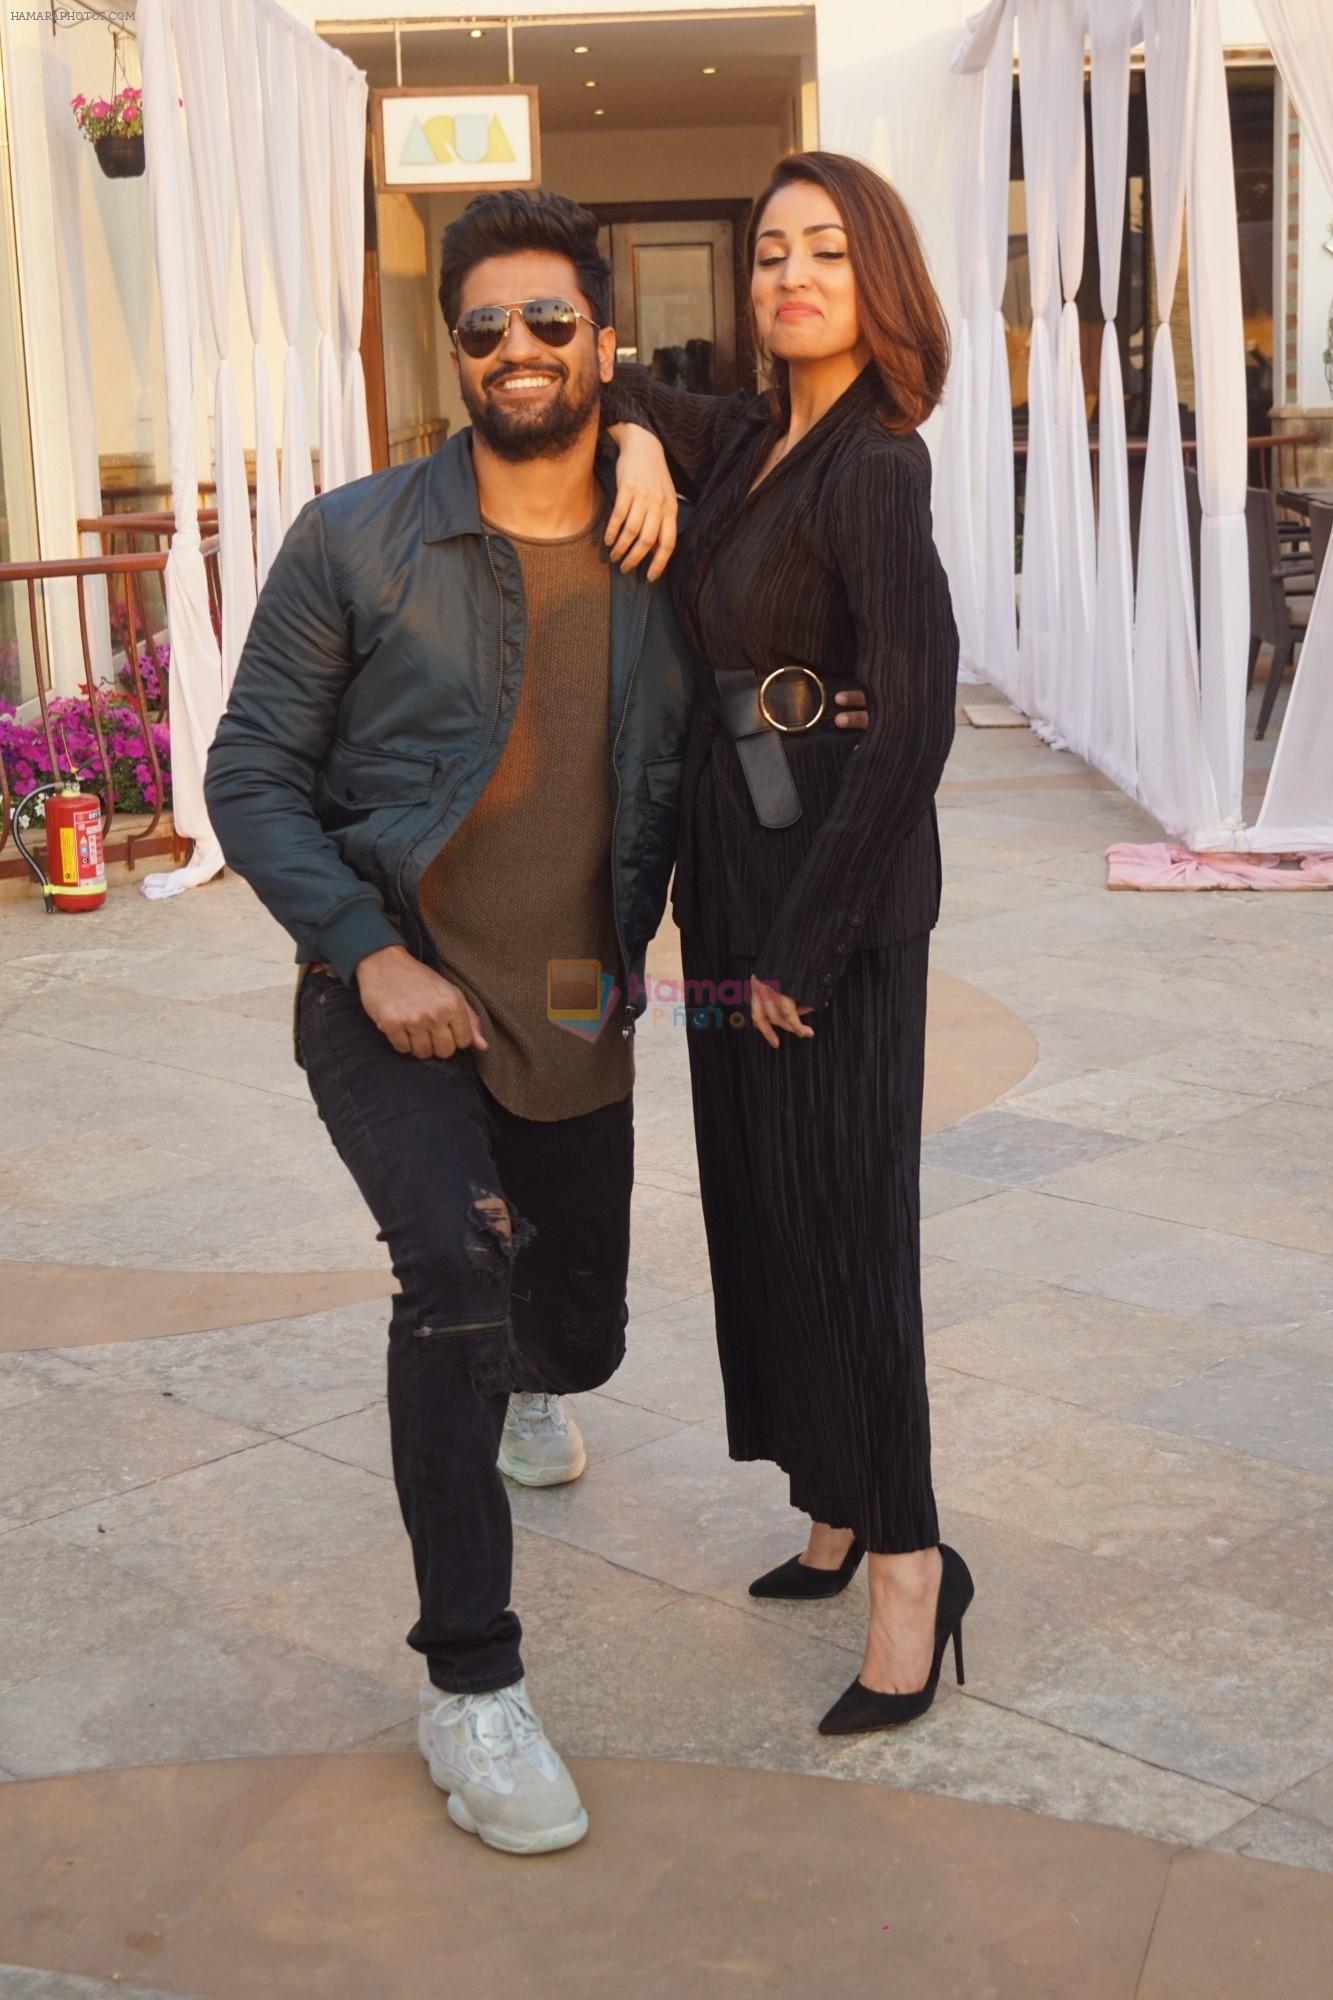 Vicky Kaushal, Yami Gautam Spotted for Media Interview of film URI on 7th Jan 2019